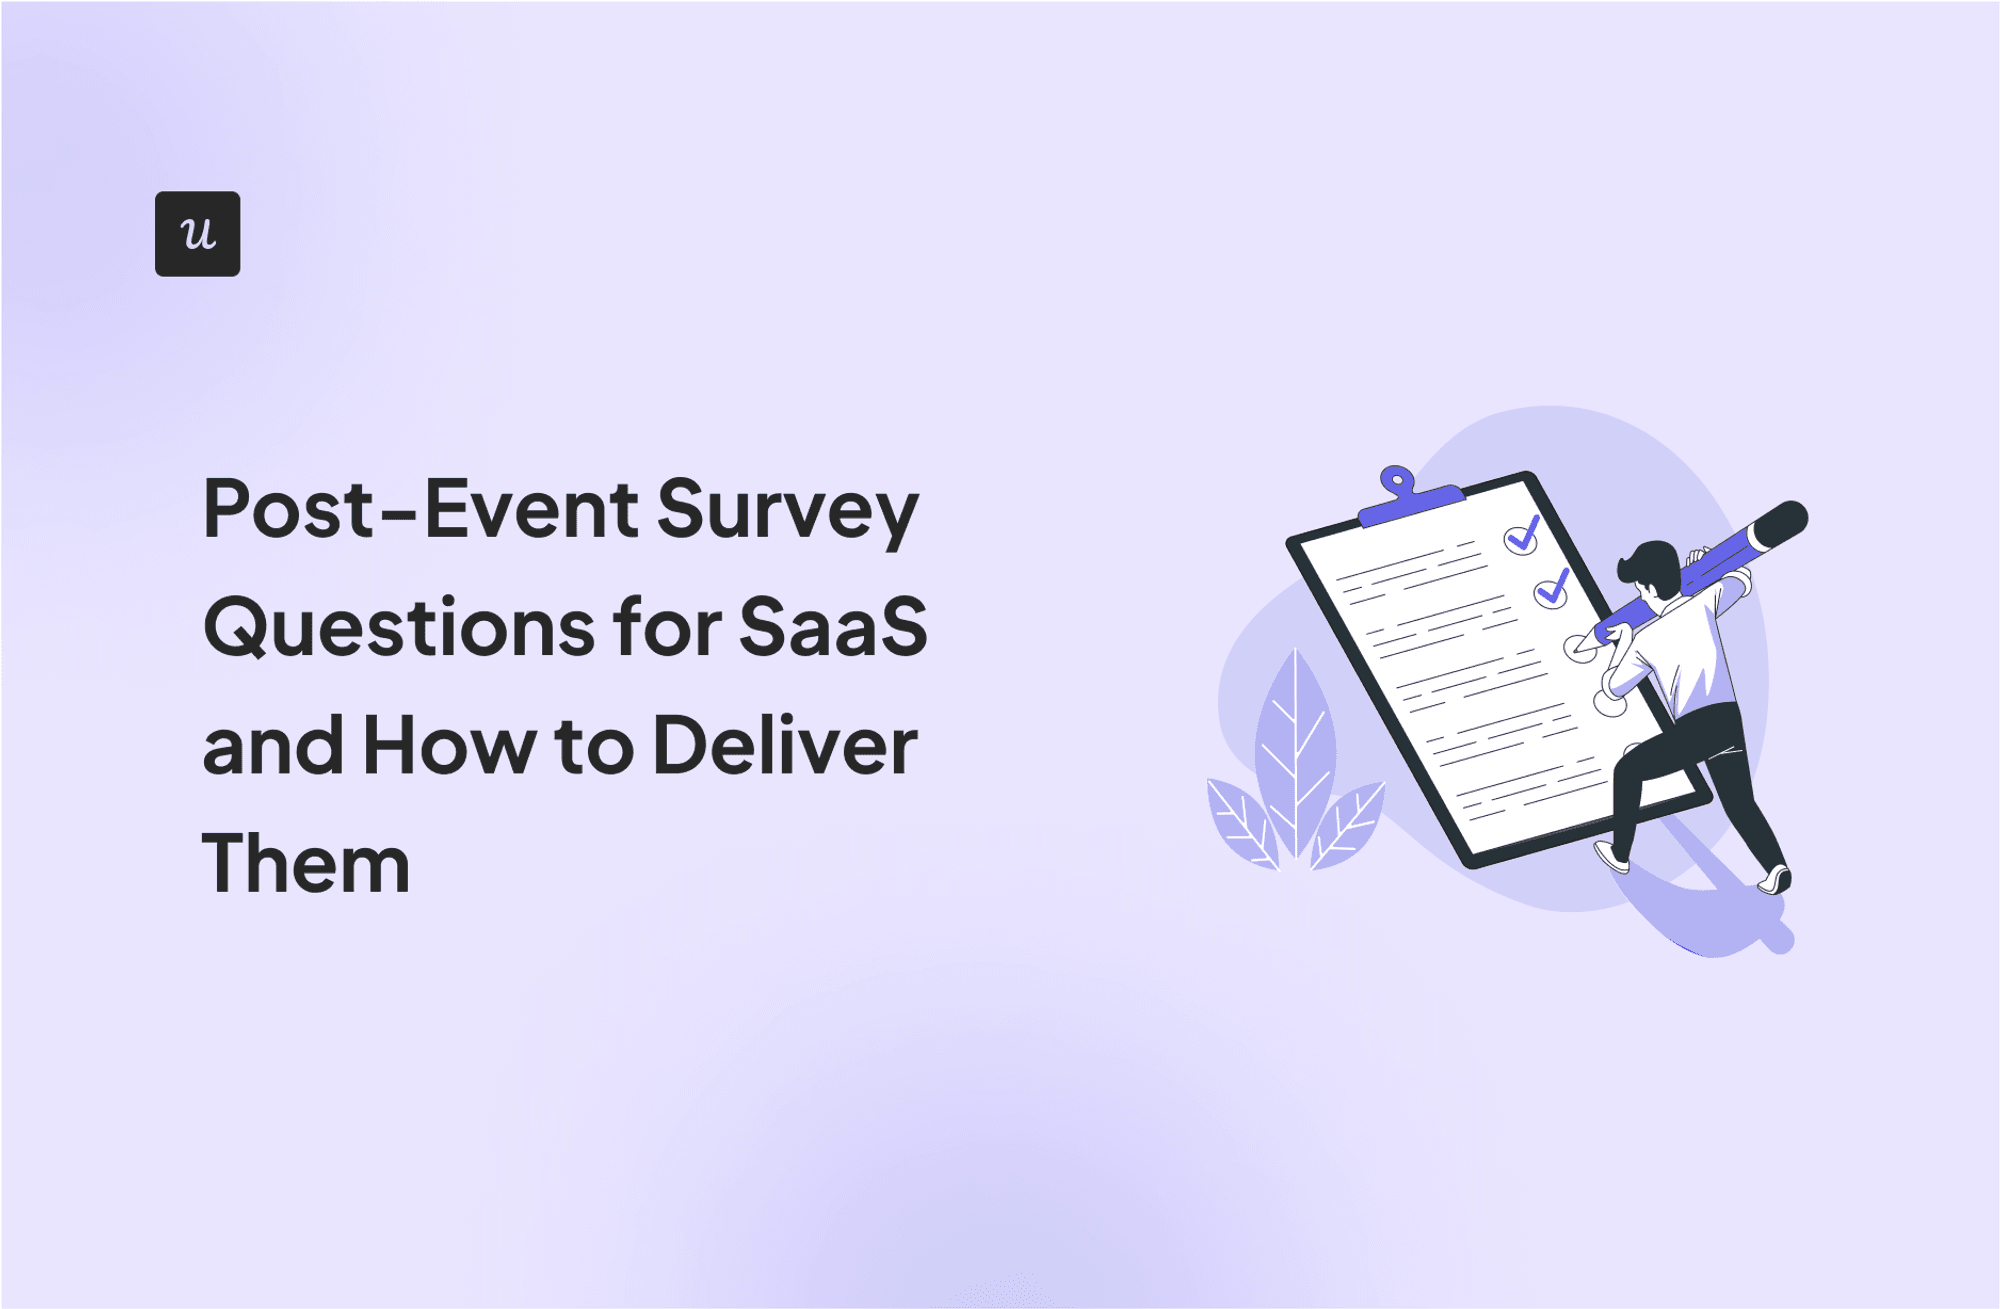 Post-event Survey Questions for SaaS and How to Deliver Them cover